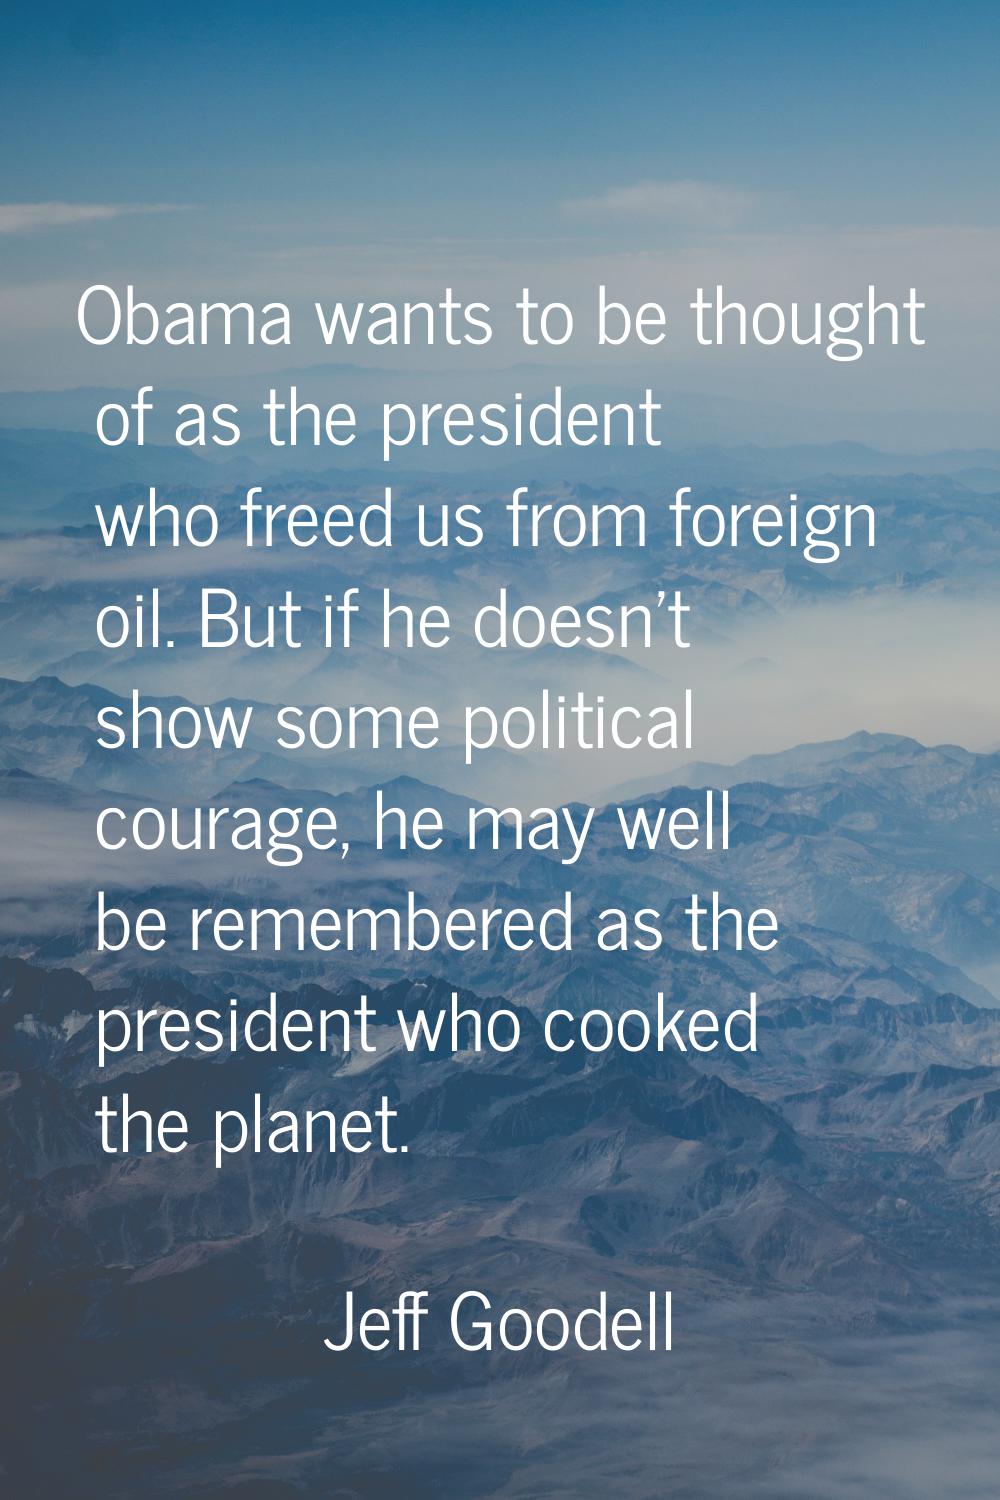 Obama wants to be thought of as the president who freed us from foreign oil. But if he doesn't show